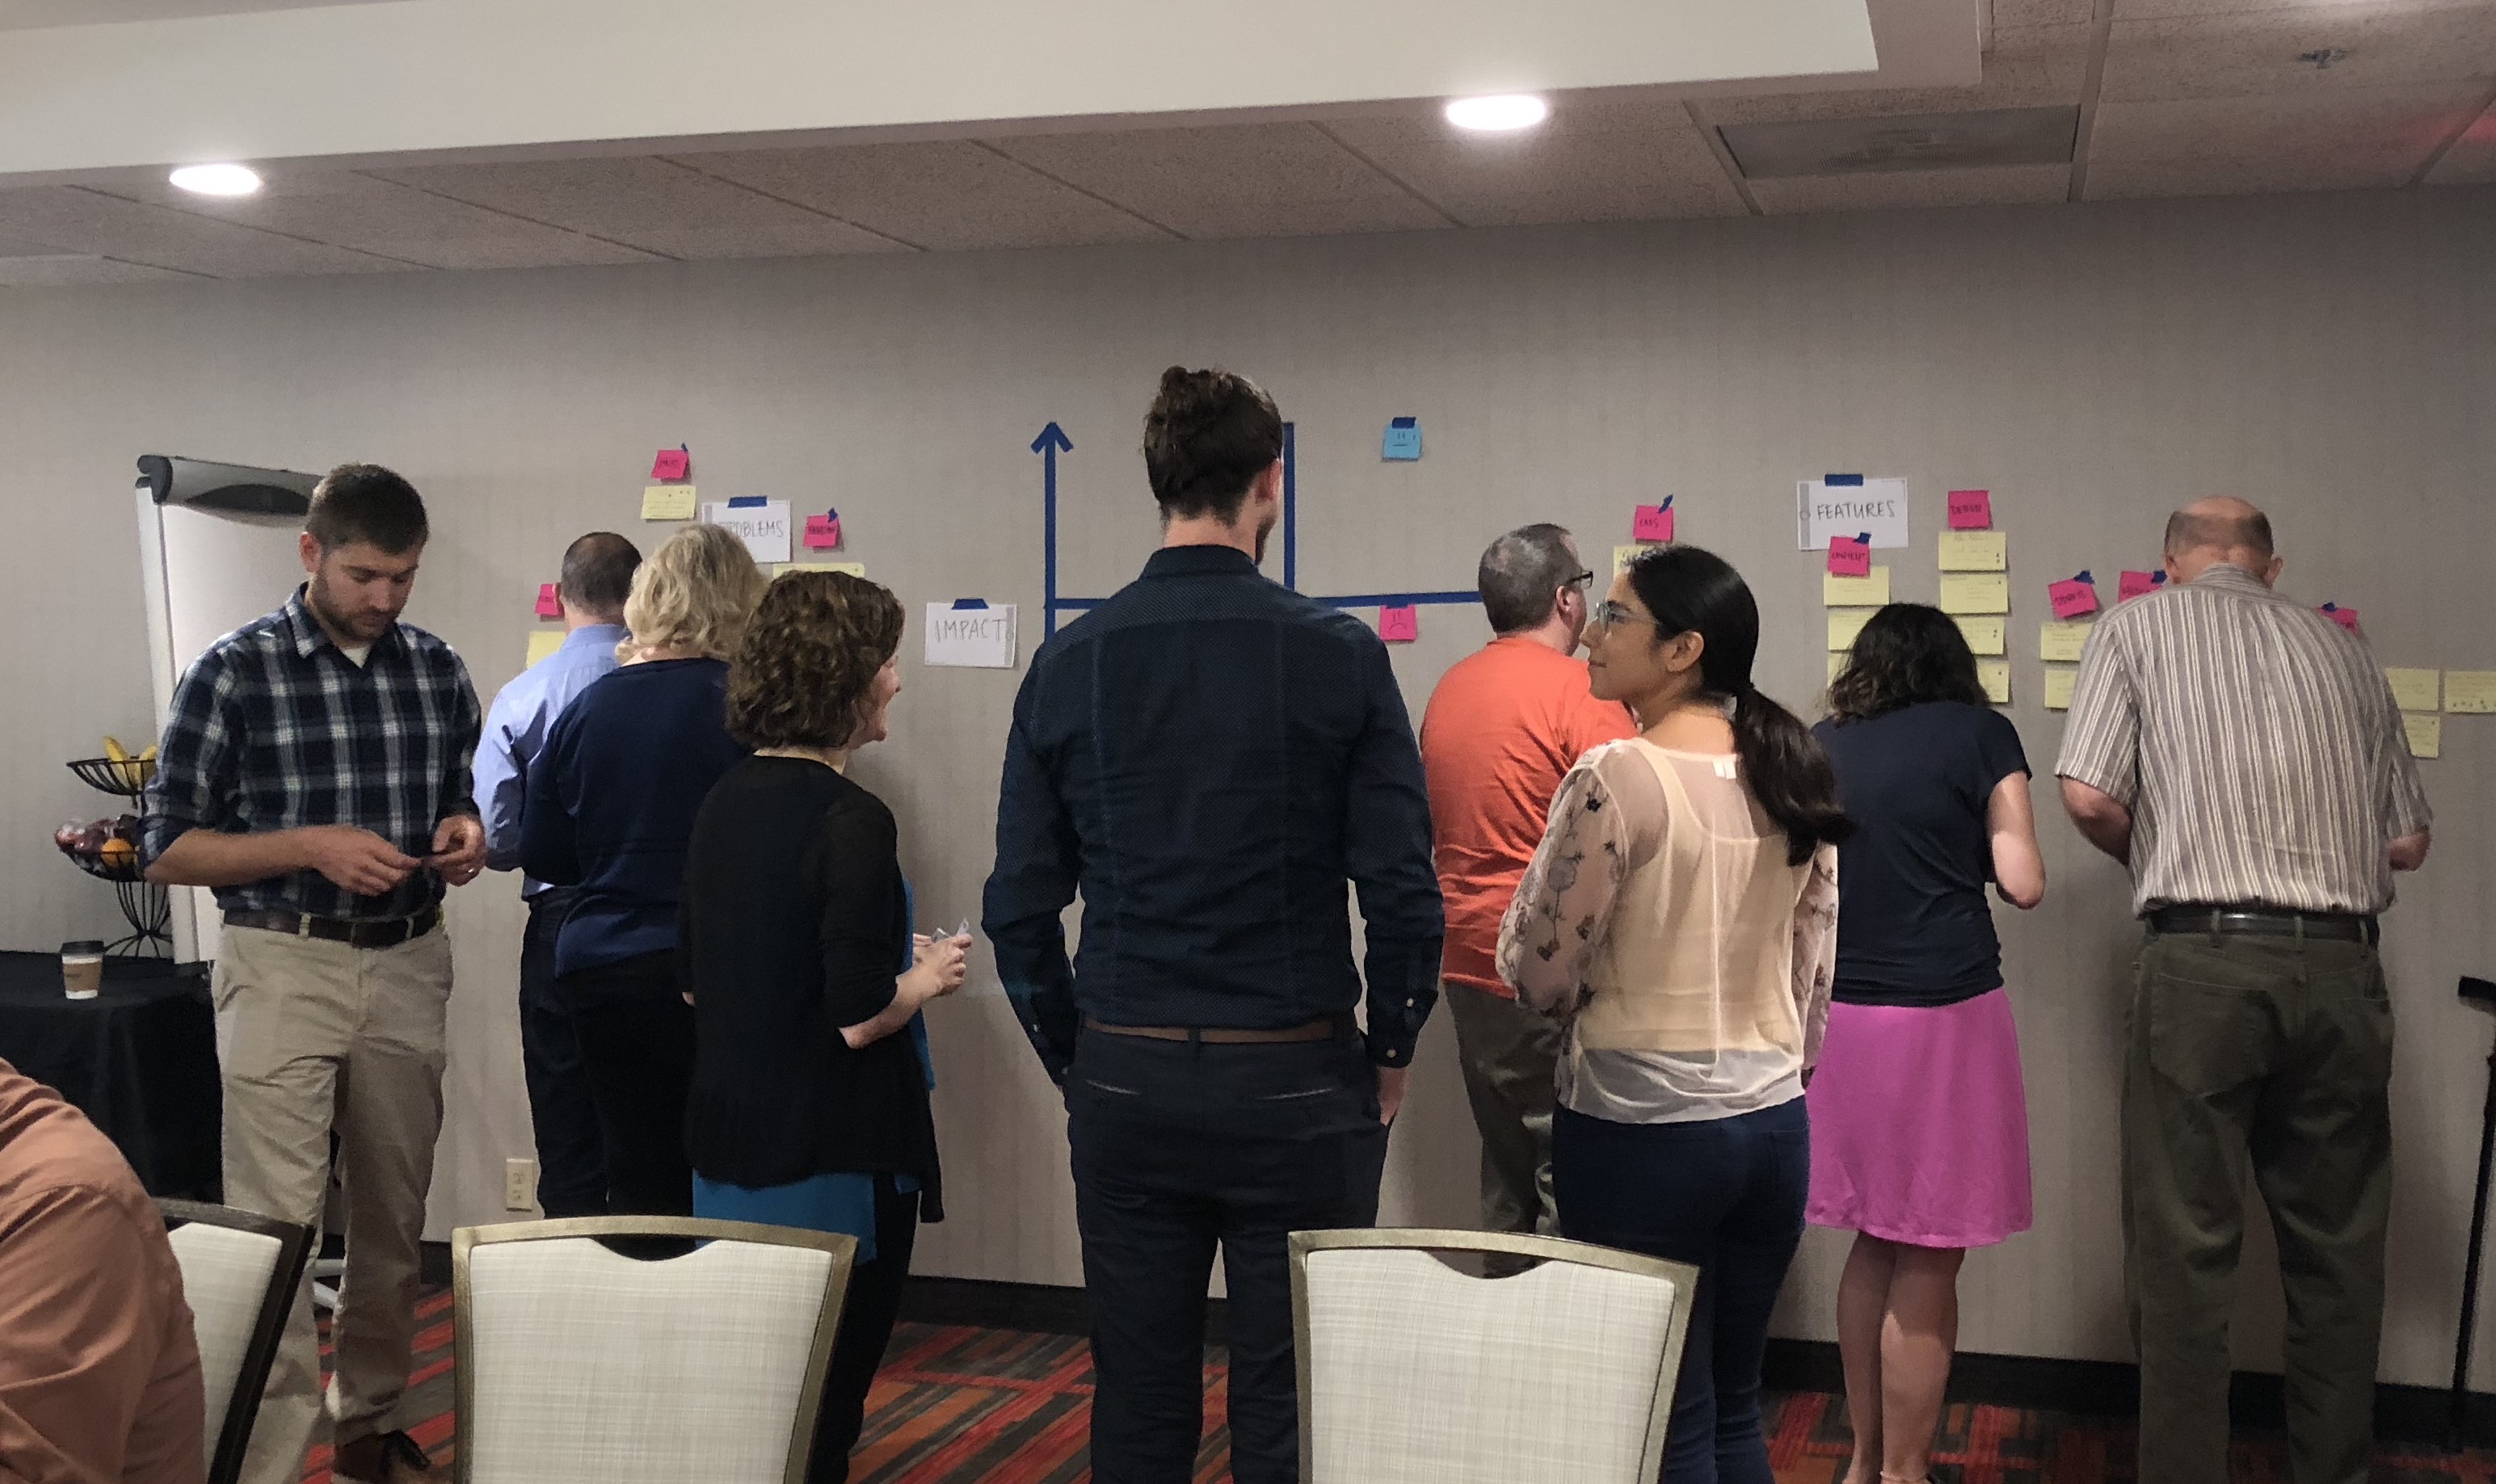 A large group of people looking at a display of post its and tape on the wall of a conference room